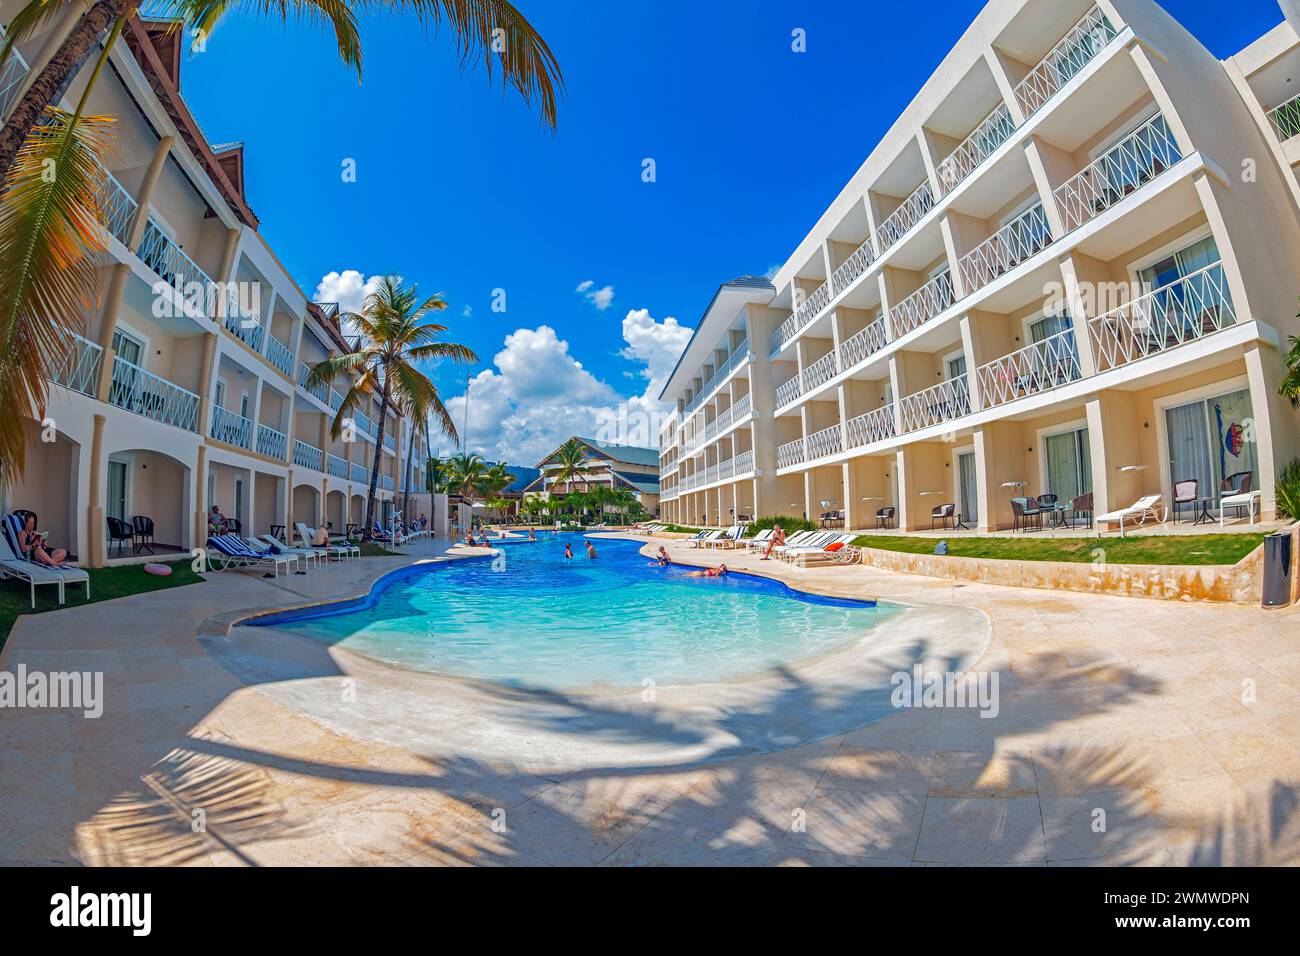 PUNTA CANA, DOMINICAN REPUBLIC - MARCH 11, 2020: Holiday resort BE LIVE at the Dominican Republic, a island that are part of the Greater Antilles arch Stock Photo